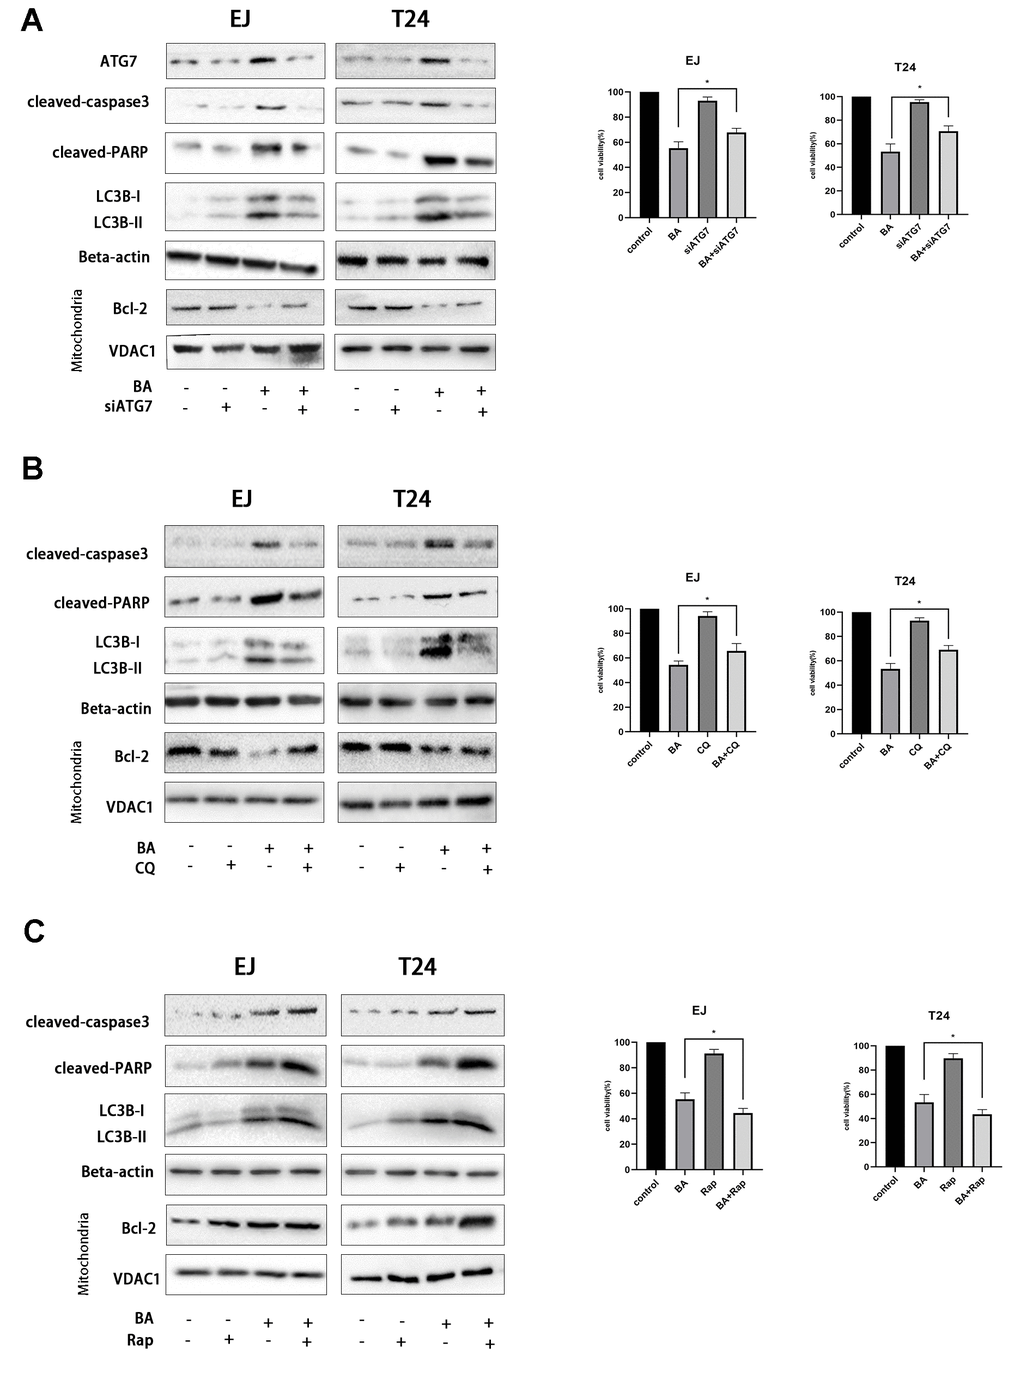 Autophagy mediates BA-induced apoptosis in bladder cancer cells. Cell viability and western blot assay results for EJ and T24 cells transfected with siATG7 or control siRNA (A) or pre-exposed to 10 μM CQ (B) or 250 nM rapamycin (Rap) (C) for 4 h prior to incubation with DMSO (control) or 25 μM BA for 24 h. The CCK-8 assay was used to assess cell viability. Western blot was employed to corroborate ATG7 deletion (A) and to analyze apoptosis (Bcl-2; cleaved caspase-3; cleaved PARP), and autophagy (LC3B-II) markers (A–C). *pp